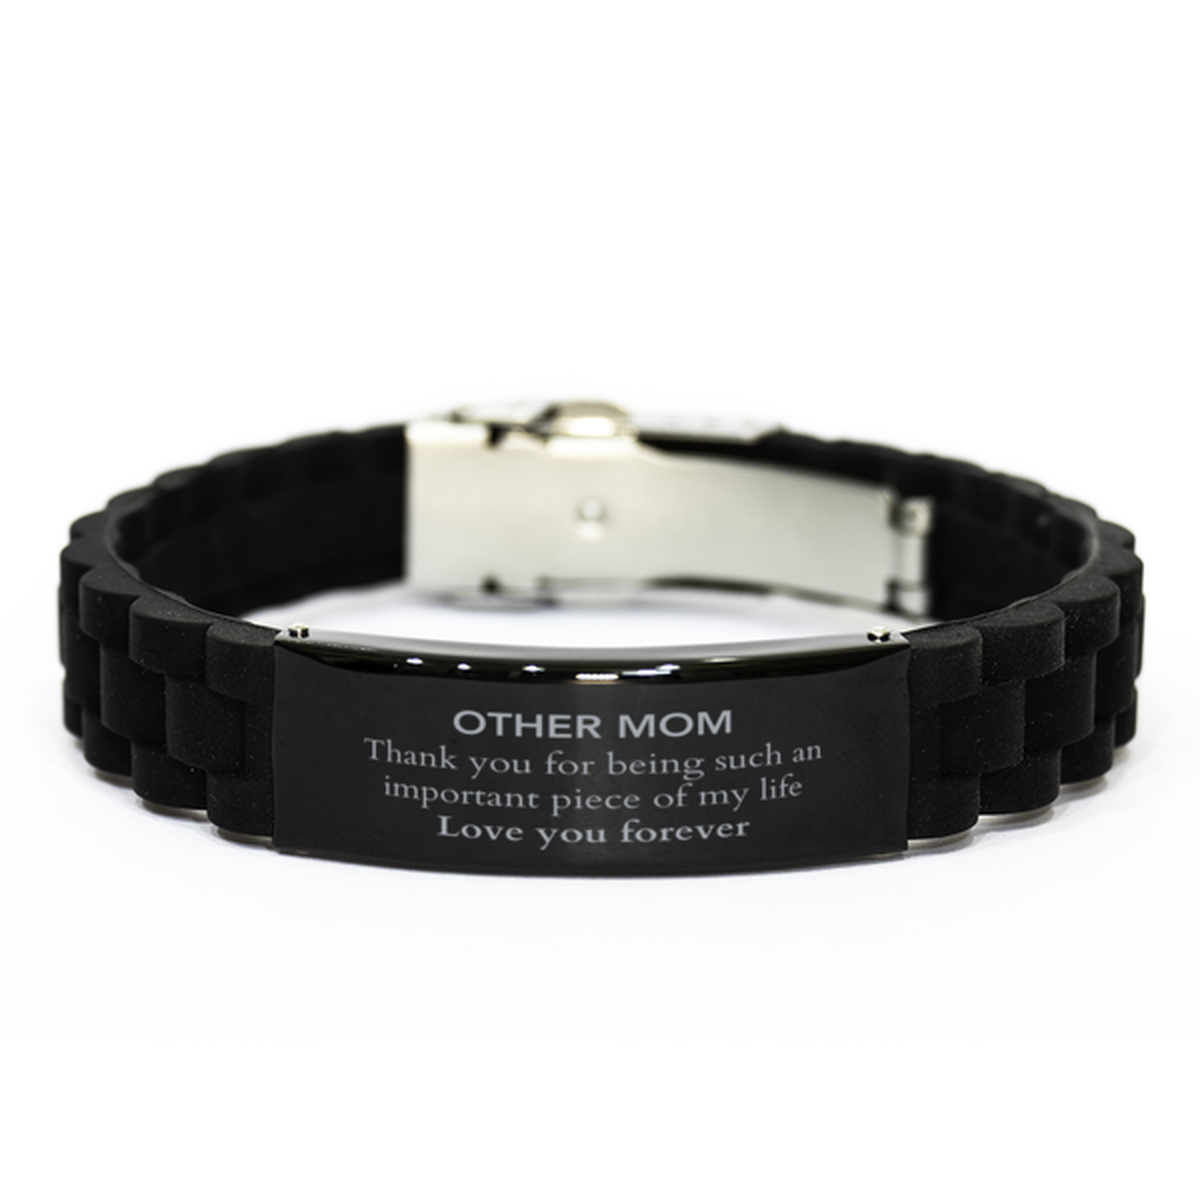 Appropriate Other Mom Black Glidelock Clasp Bracelet Epic Birthday Gifts for Other Mom Thank you for being such an important piece of my life Other Mom Christmas Mothers Fathers Day